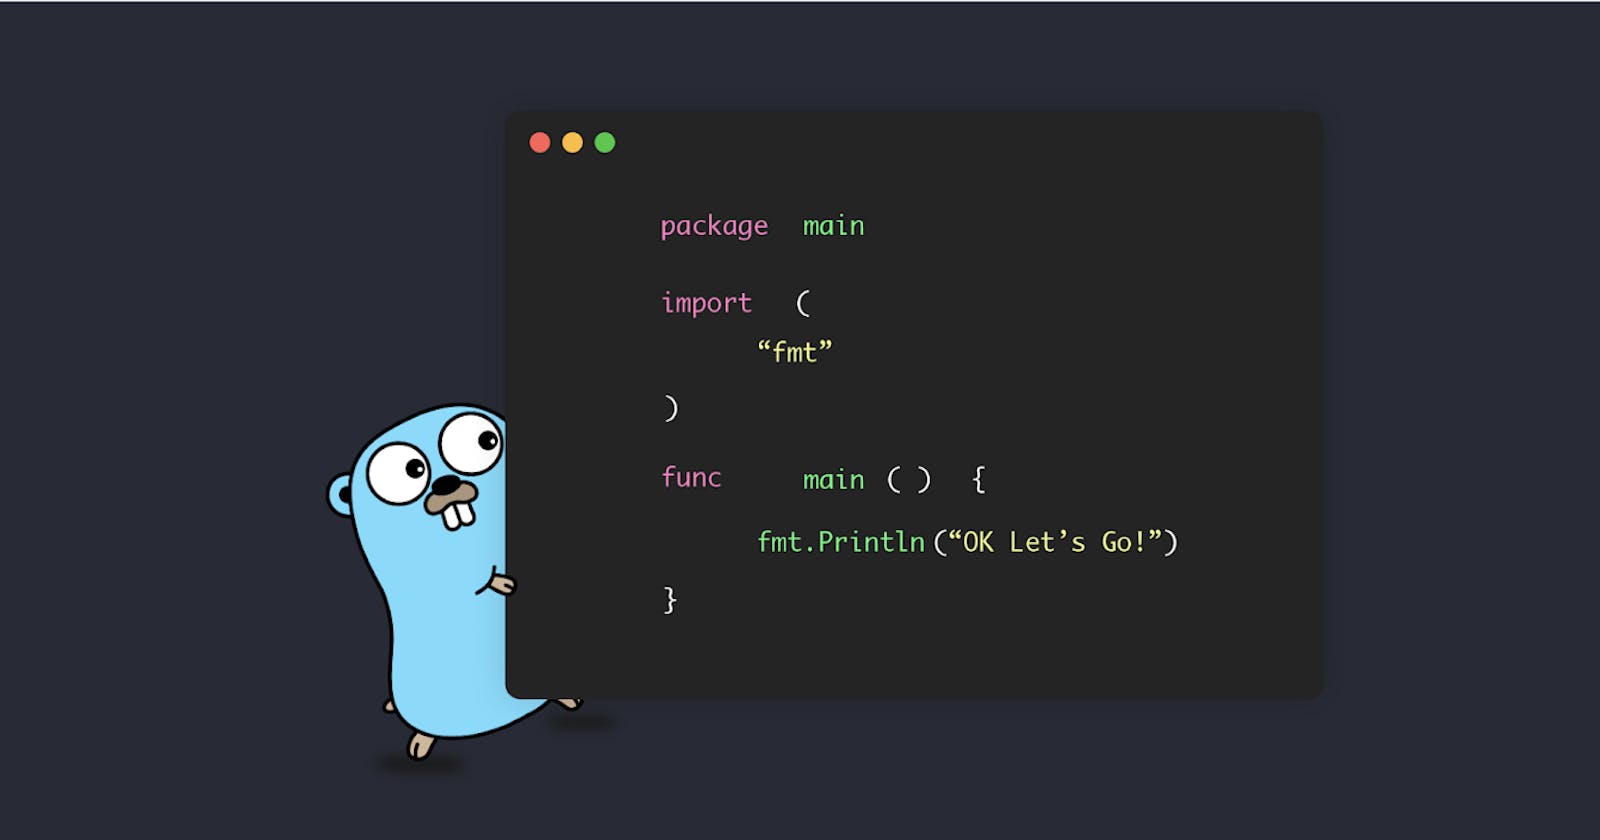 Build a simple guessing game in Golang